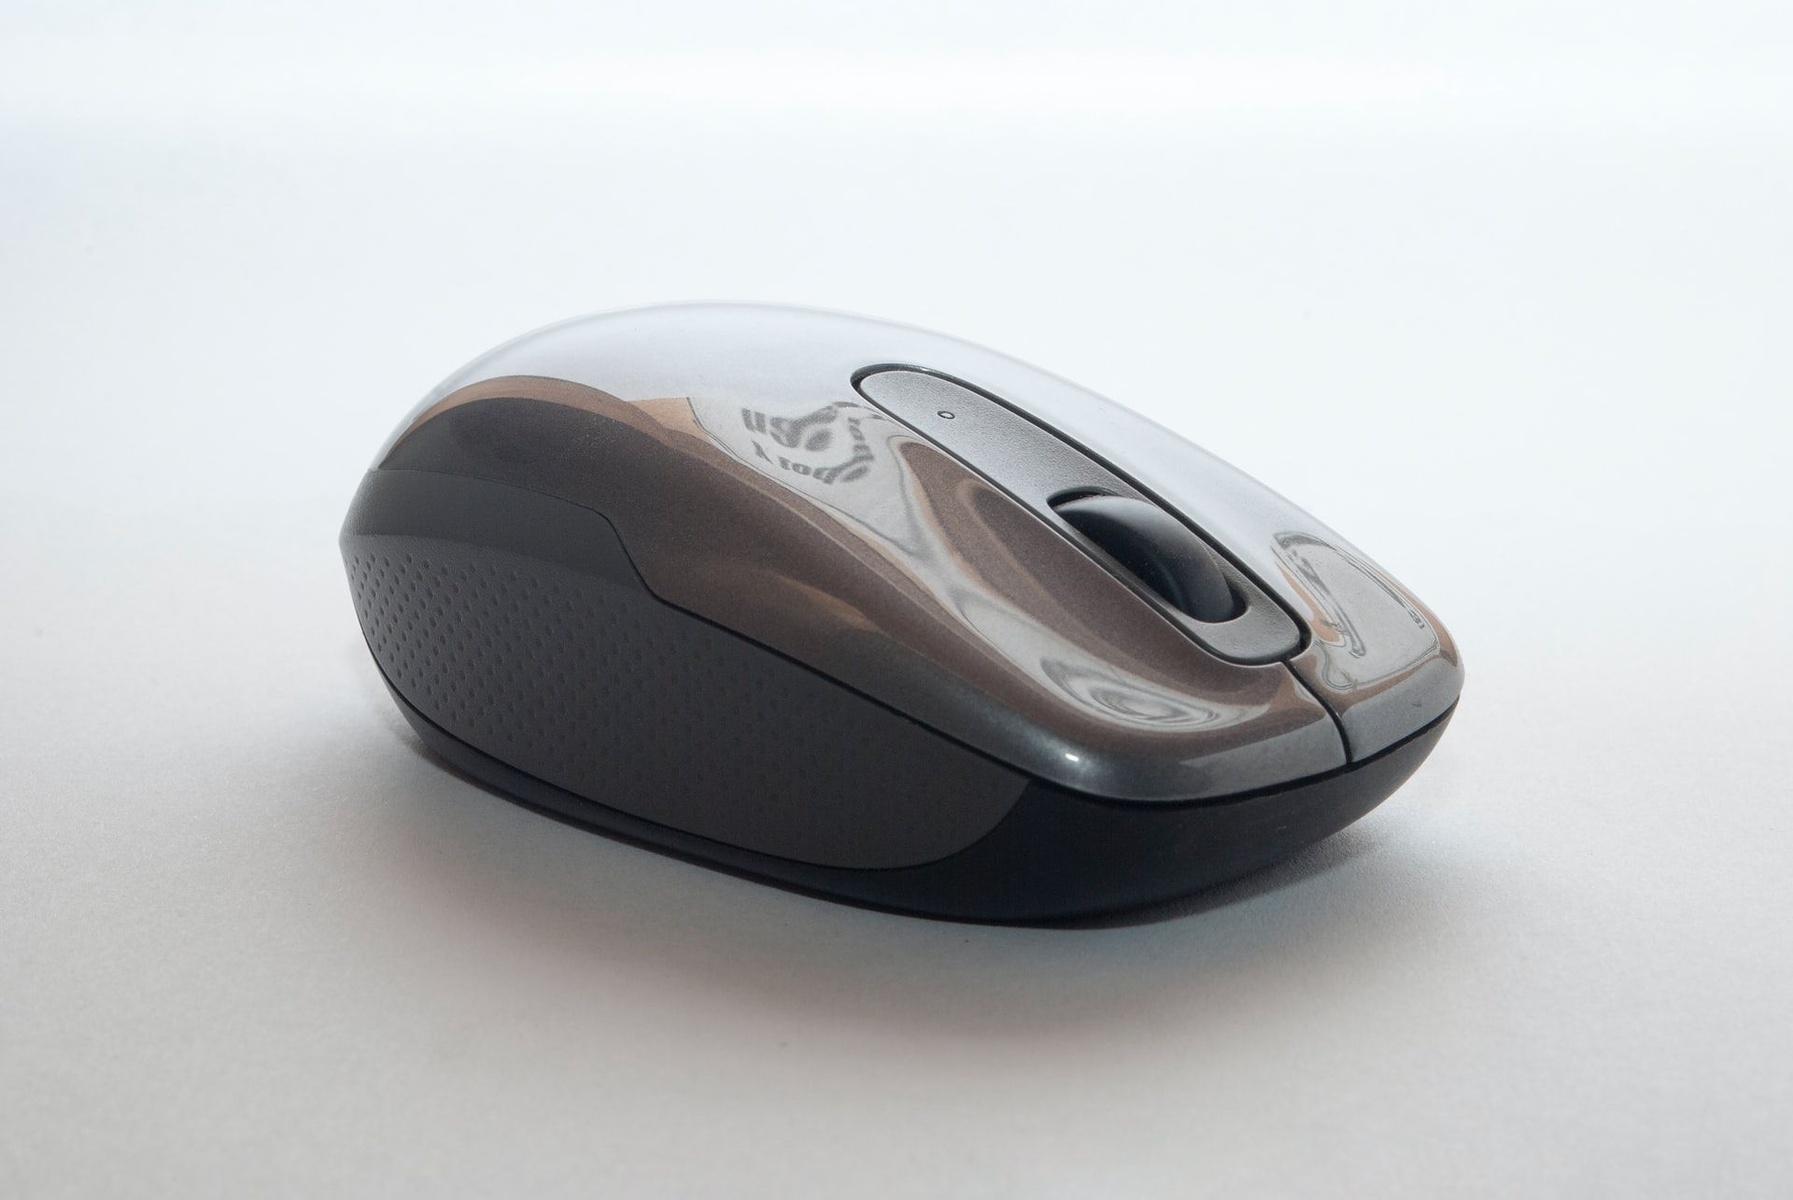 How To Change DPI Of Gaming Mouse